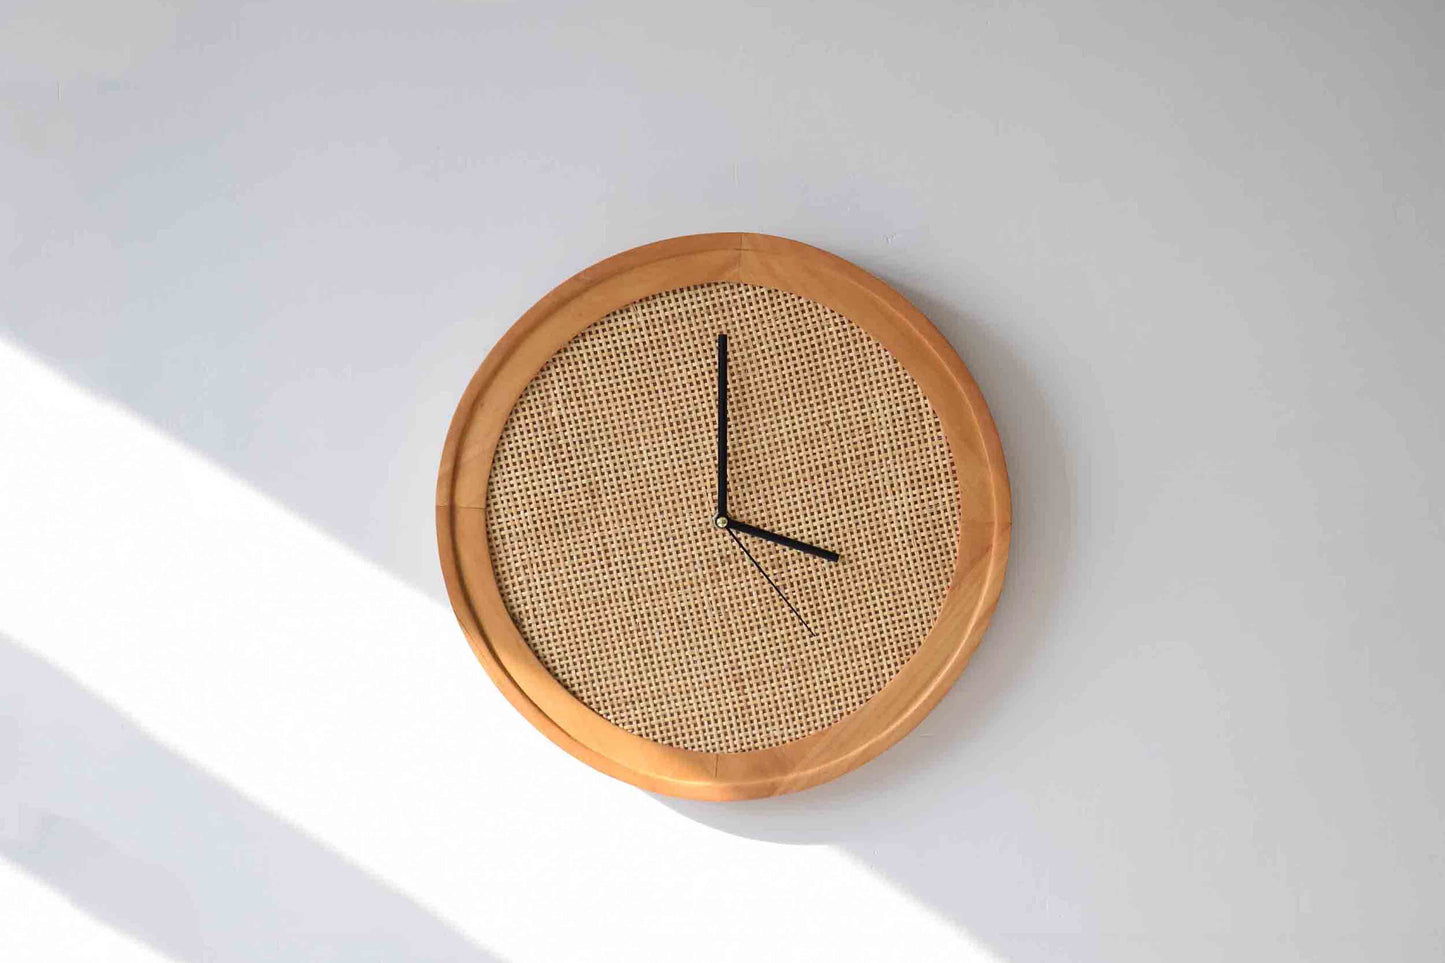 Cane wall clock for home 